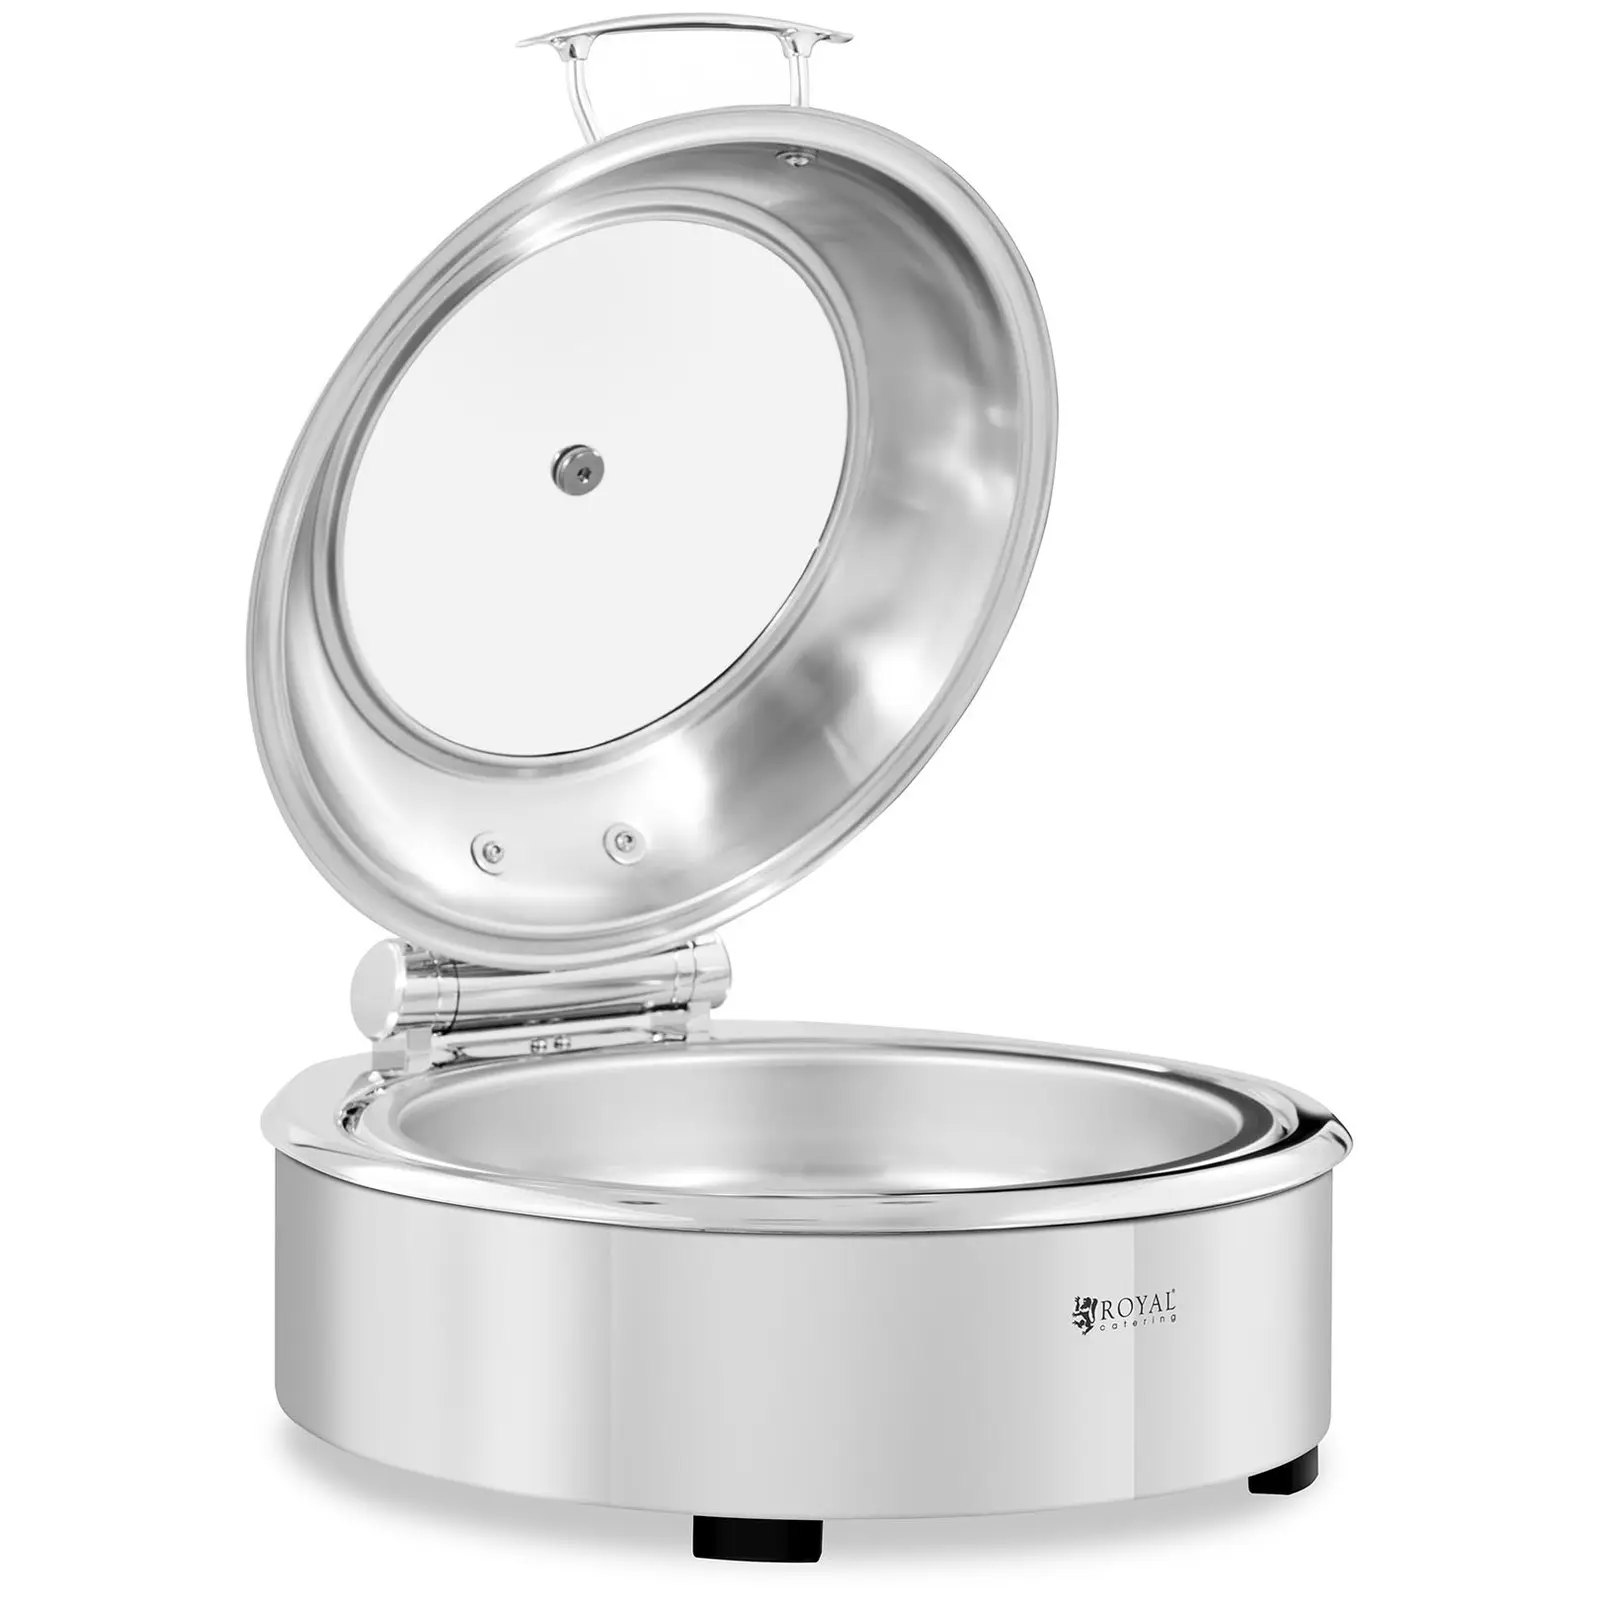 Chafing dish rond avec hublot - Royal Catering - 5,5 l